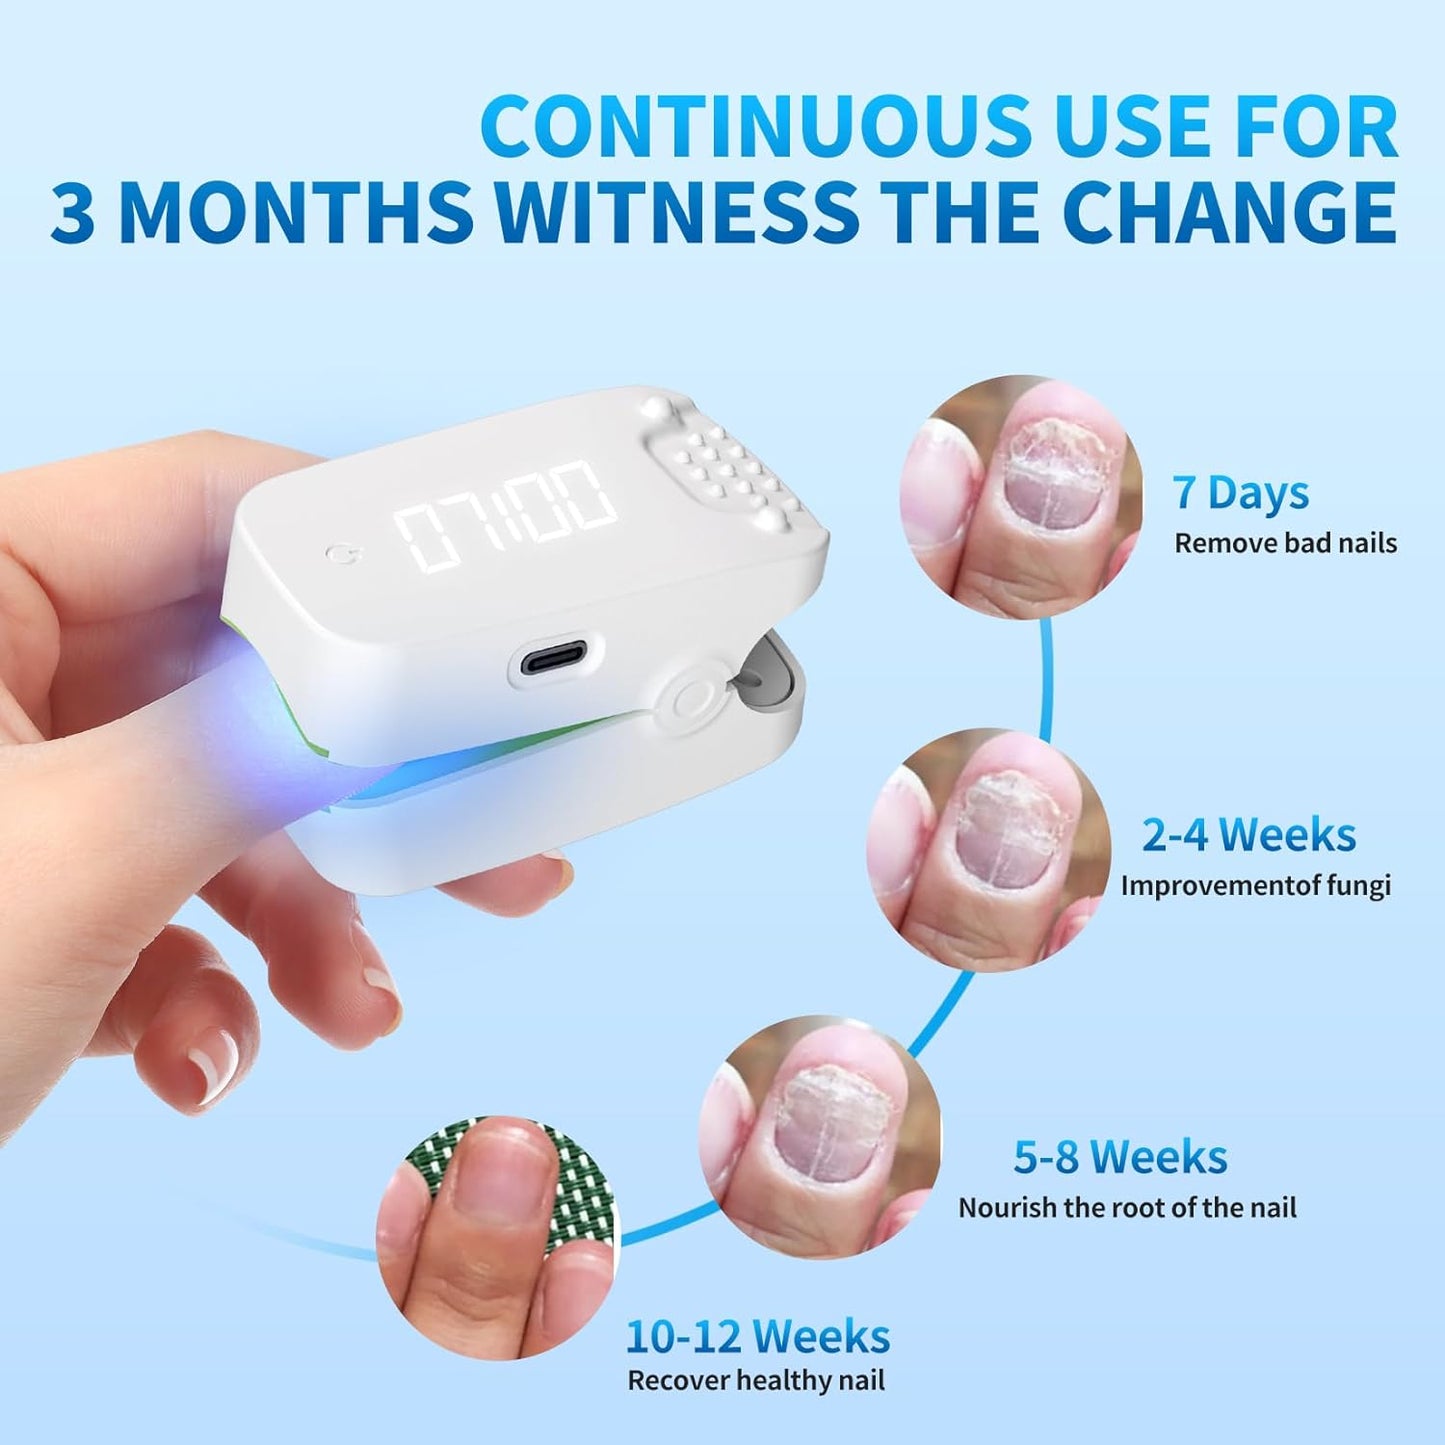 Glitreniee Nail Fungus Laser Treatment Device for Fingernails and Toenails, Rechargeable Nail Fungus Cleaning Laser Device with Digital Led Display, Effective Nail Light Treatment for Home Use (White)